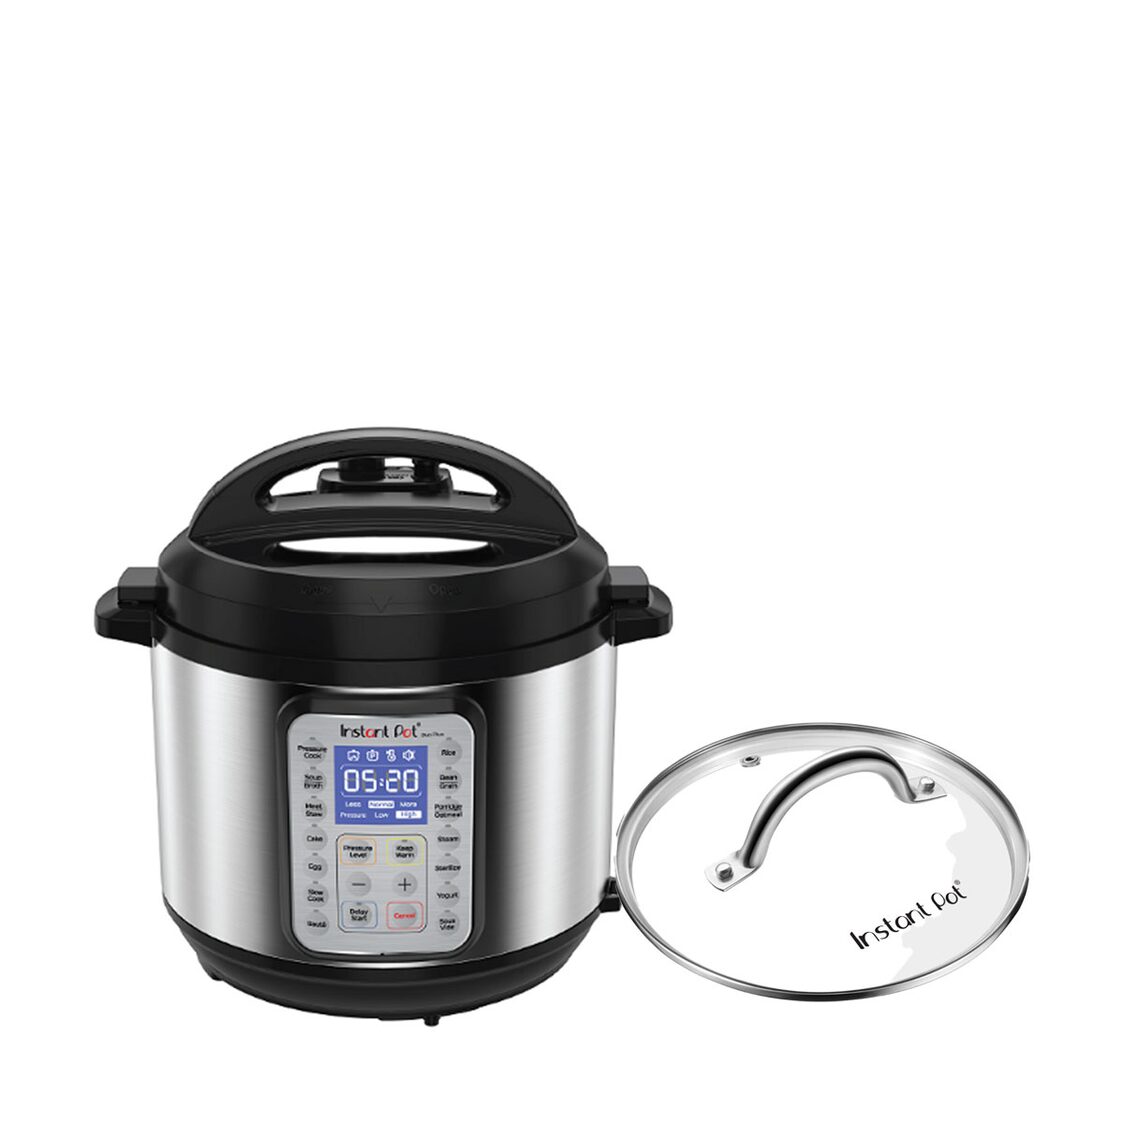 Instant Pot Duo Plus 9-in-1 Electric Pressure Cooker, Slow Cooker, Rice  Cooker, Steamer, Sauté, Yogurt Maker, Warmer & Sterilizer, Includes App  With